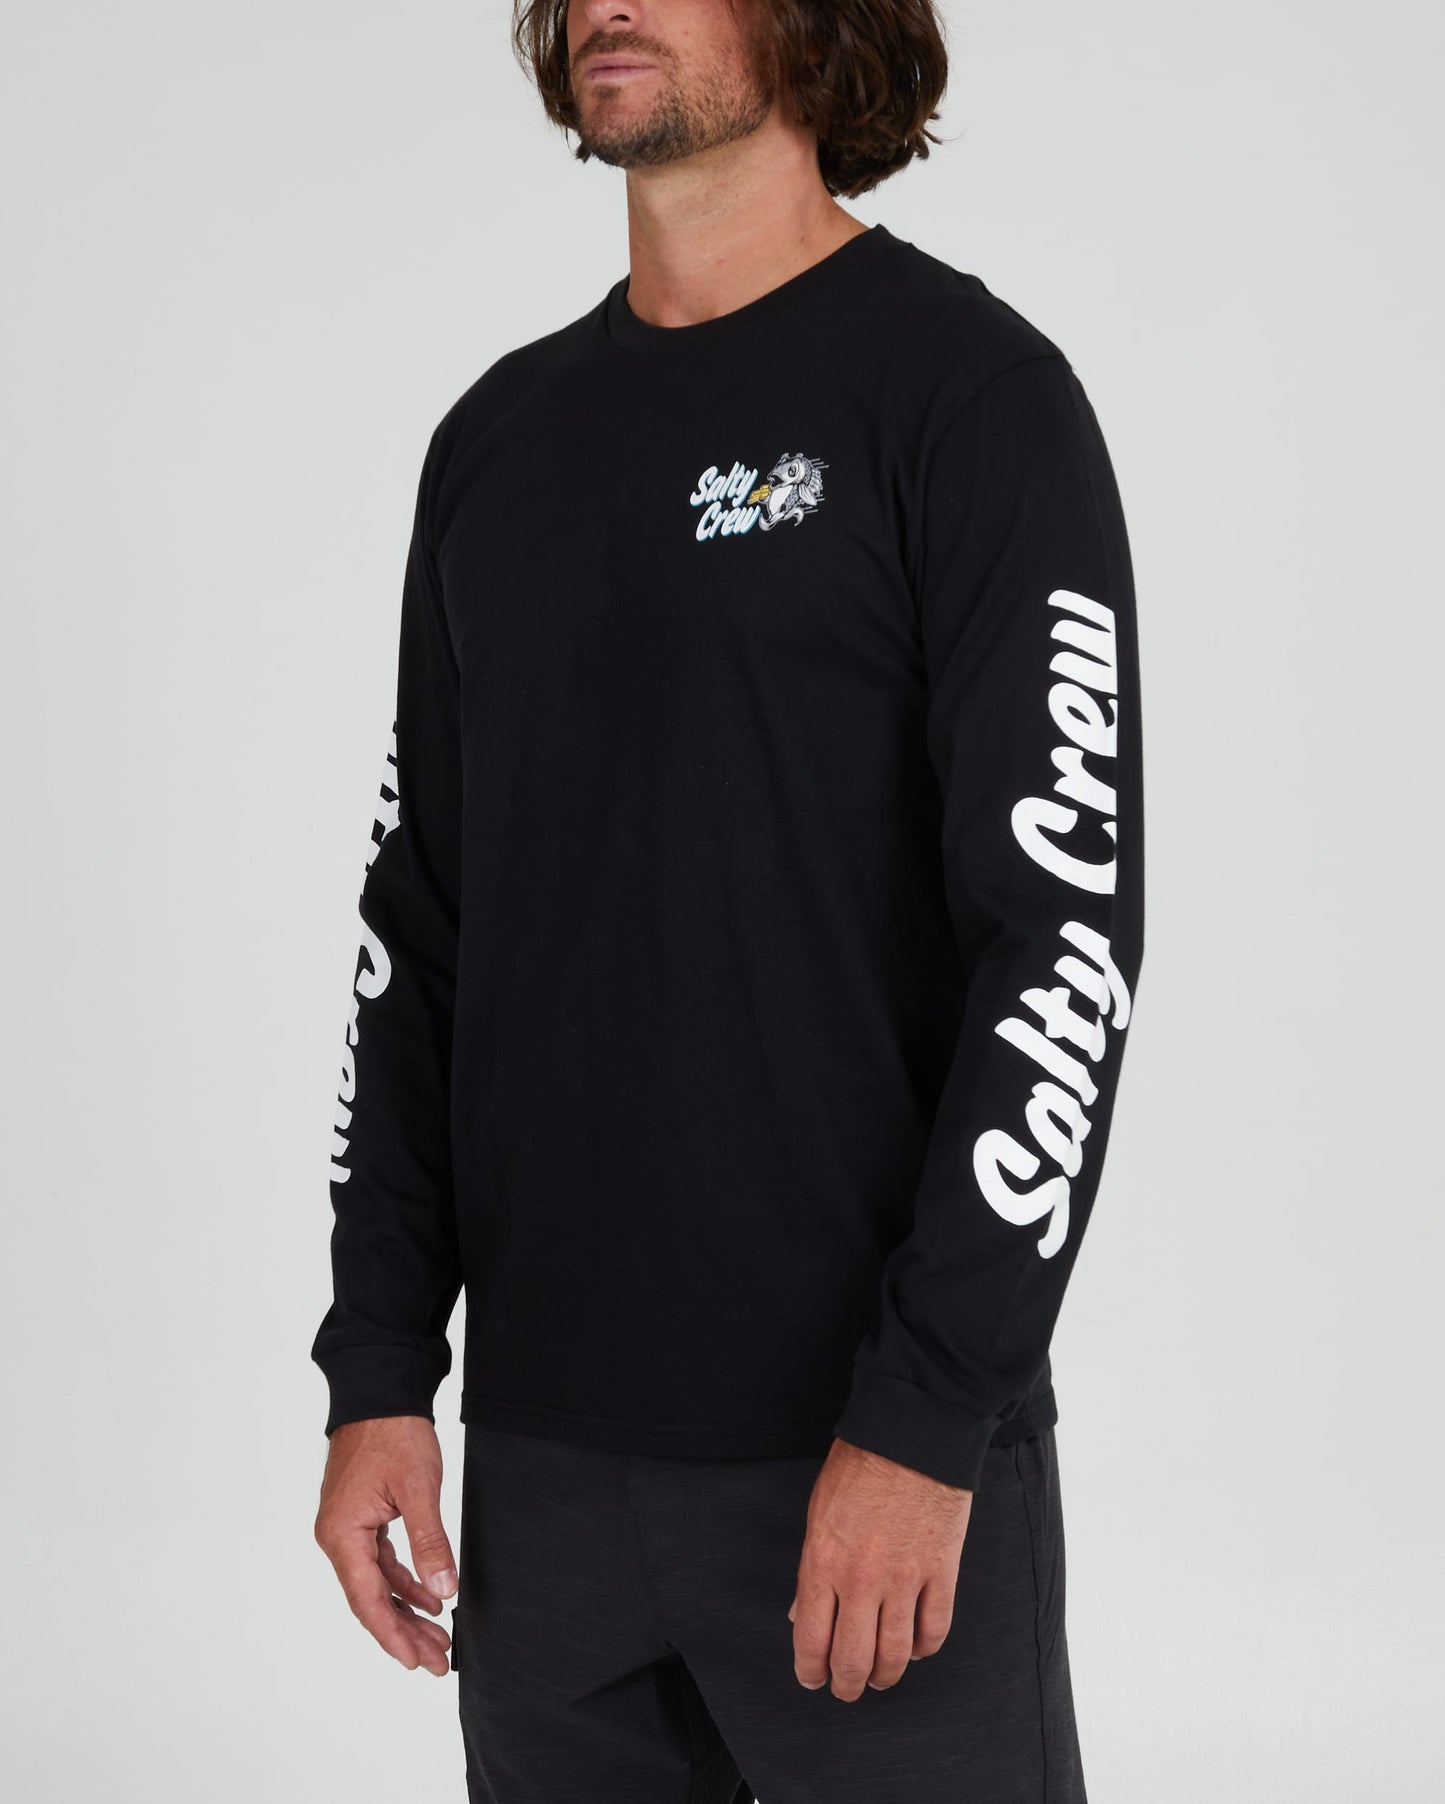 Salty crew T-SHIRTS L/S FISH AND CHIPS PREMIUM L/S TEE - Black in Black